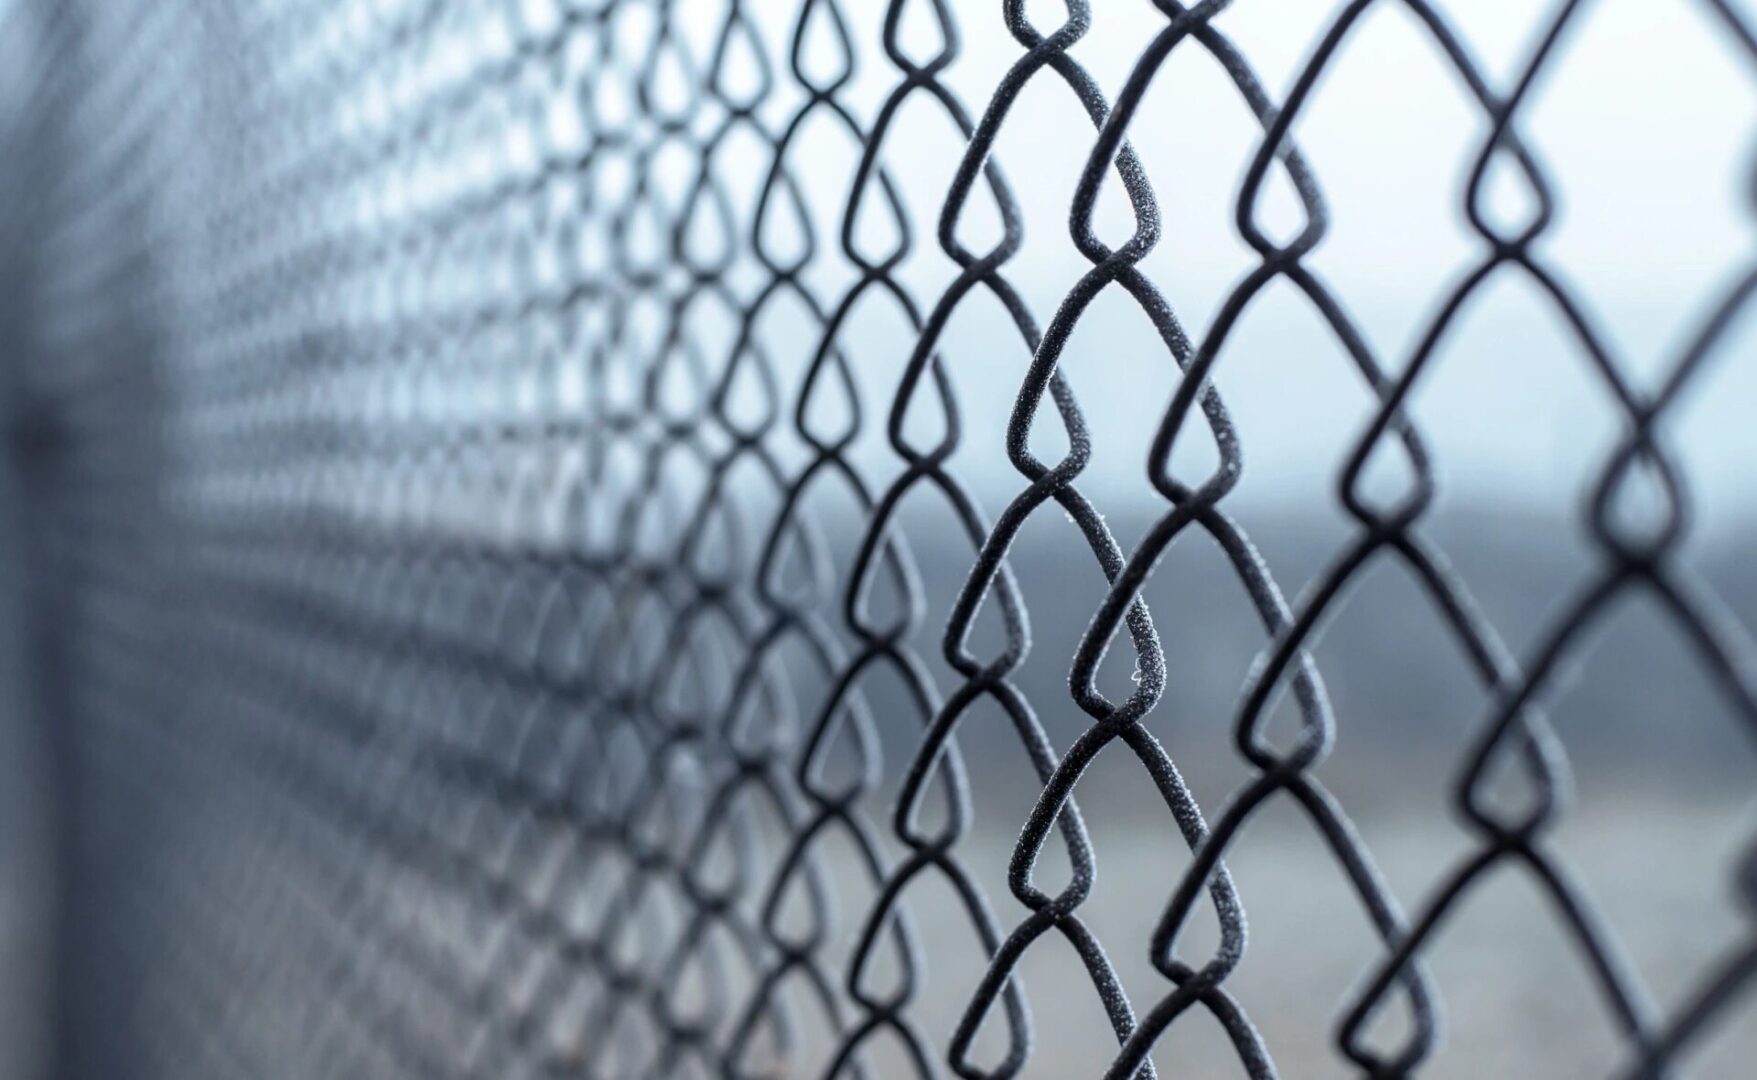 A chain link fence with a sky background